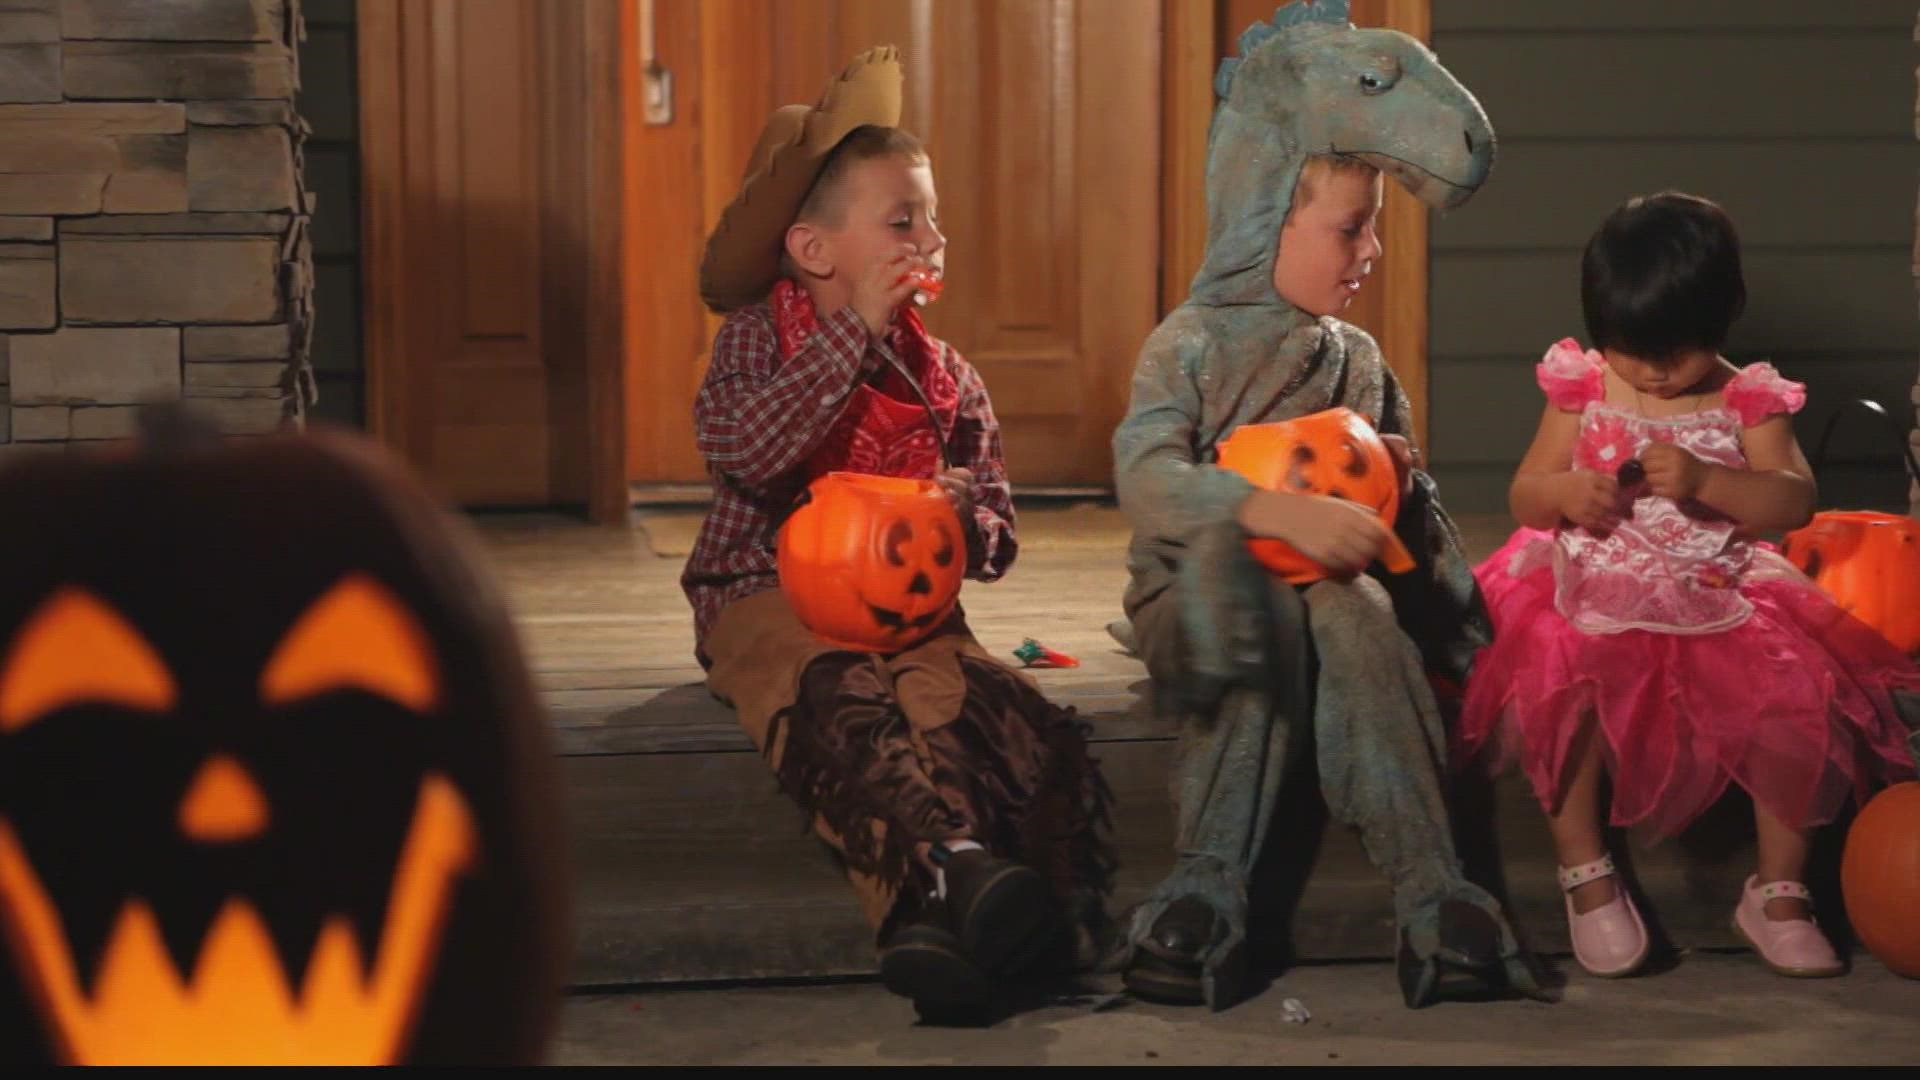 The University of Alabama in Birmingham gives some tips on how you can keep your family safe this Halloween.